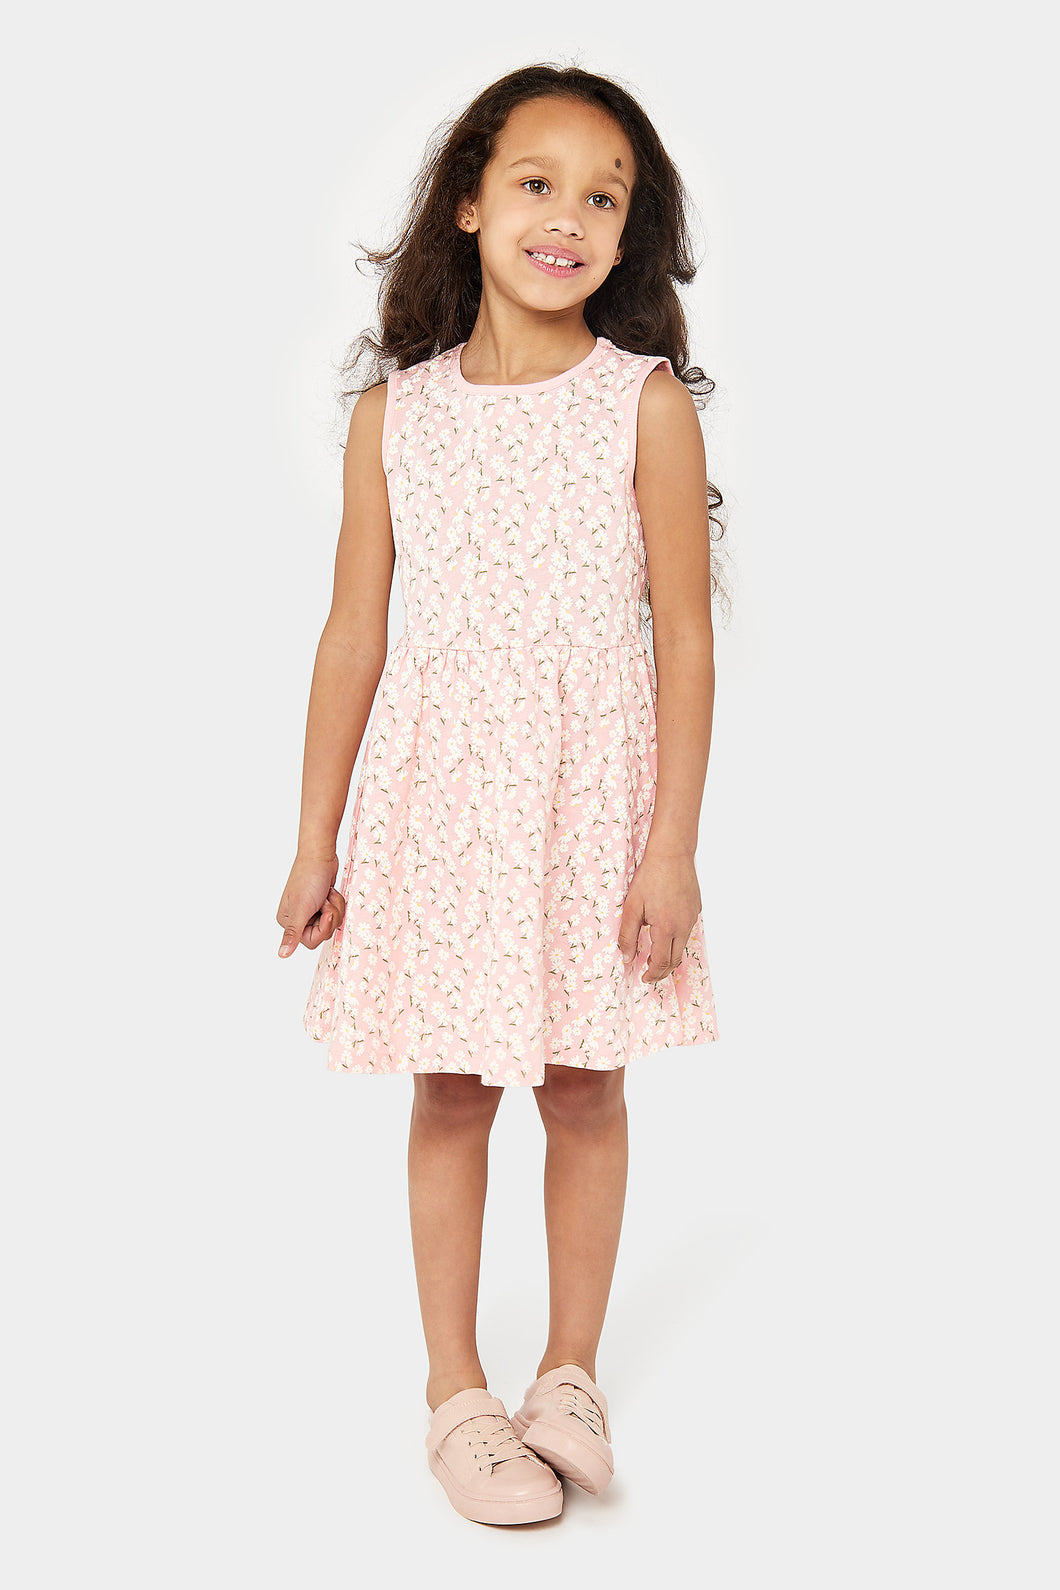 Mothercare Pink Floral Jersey Dress